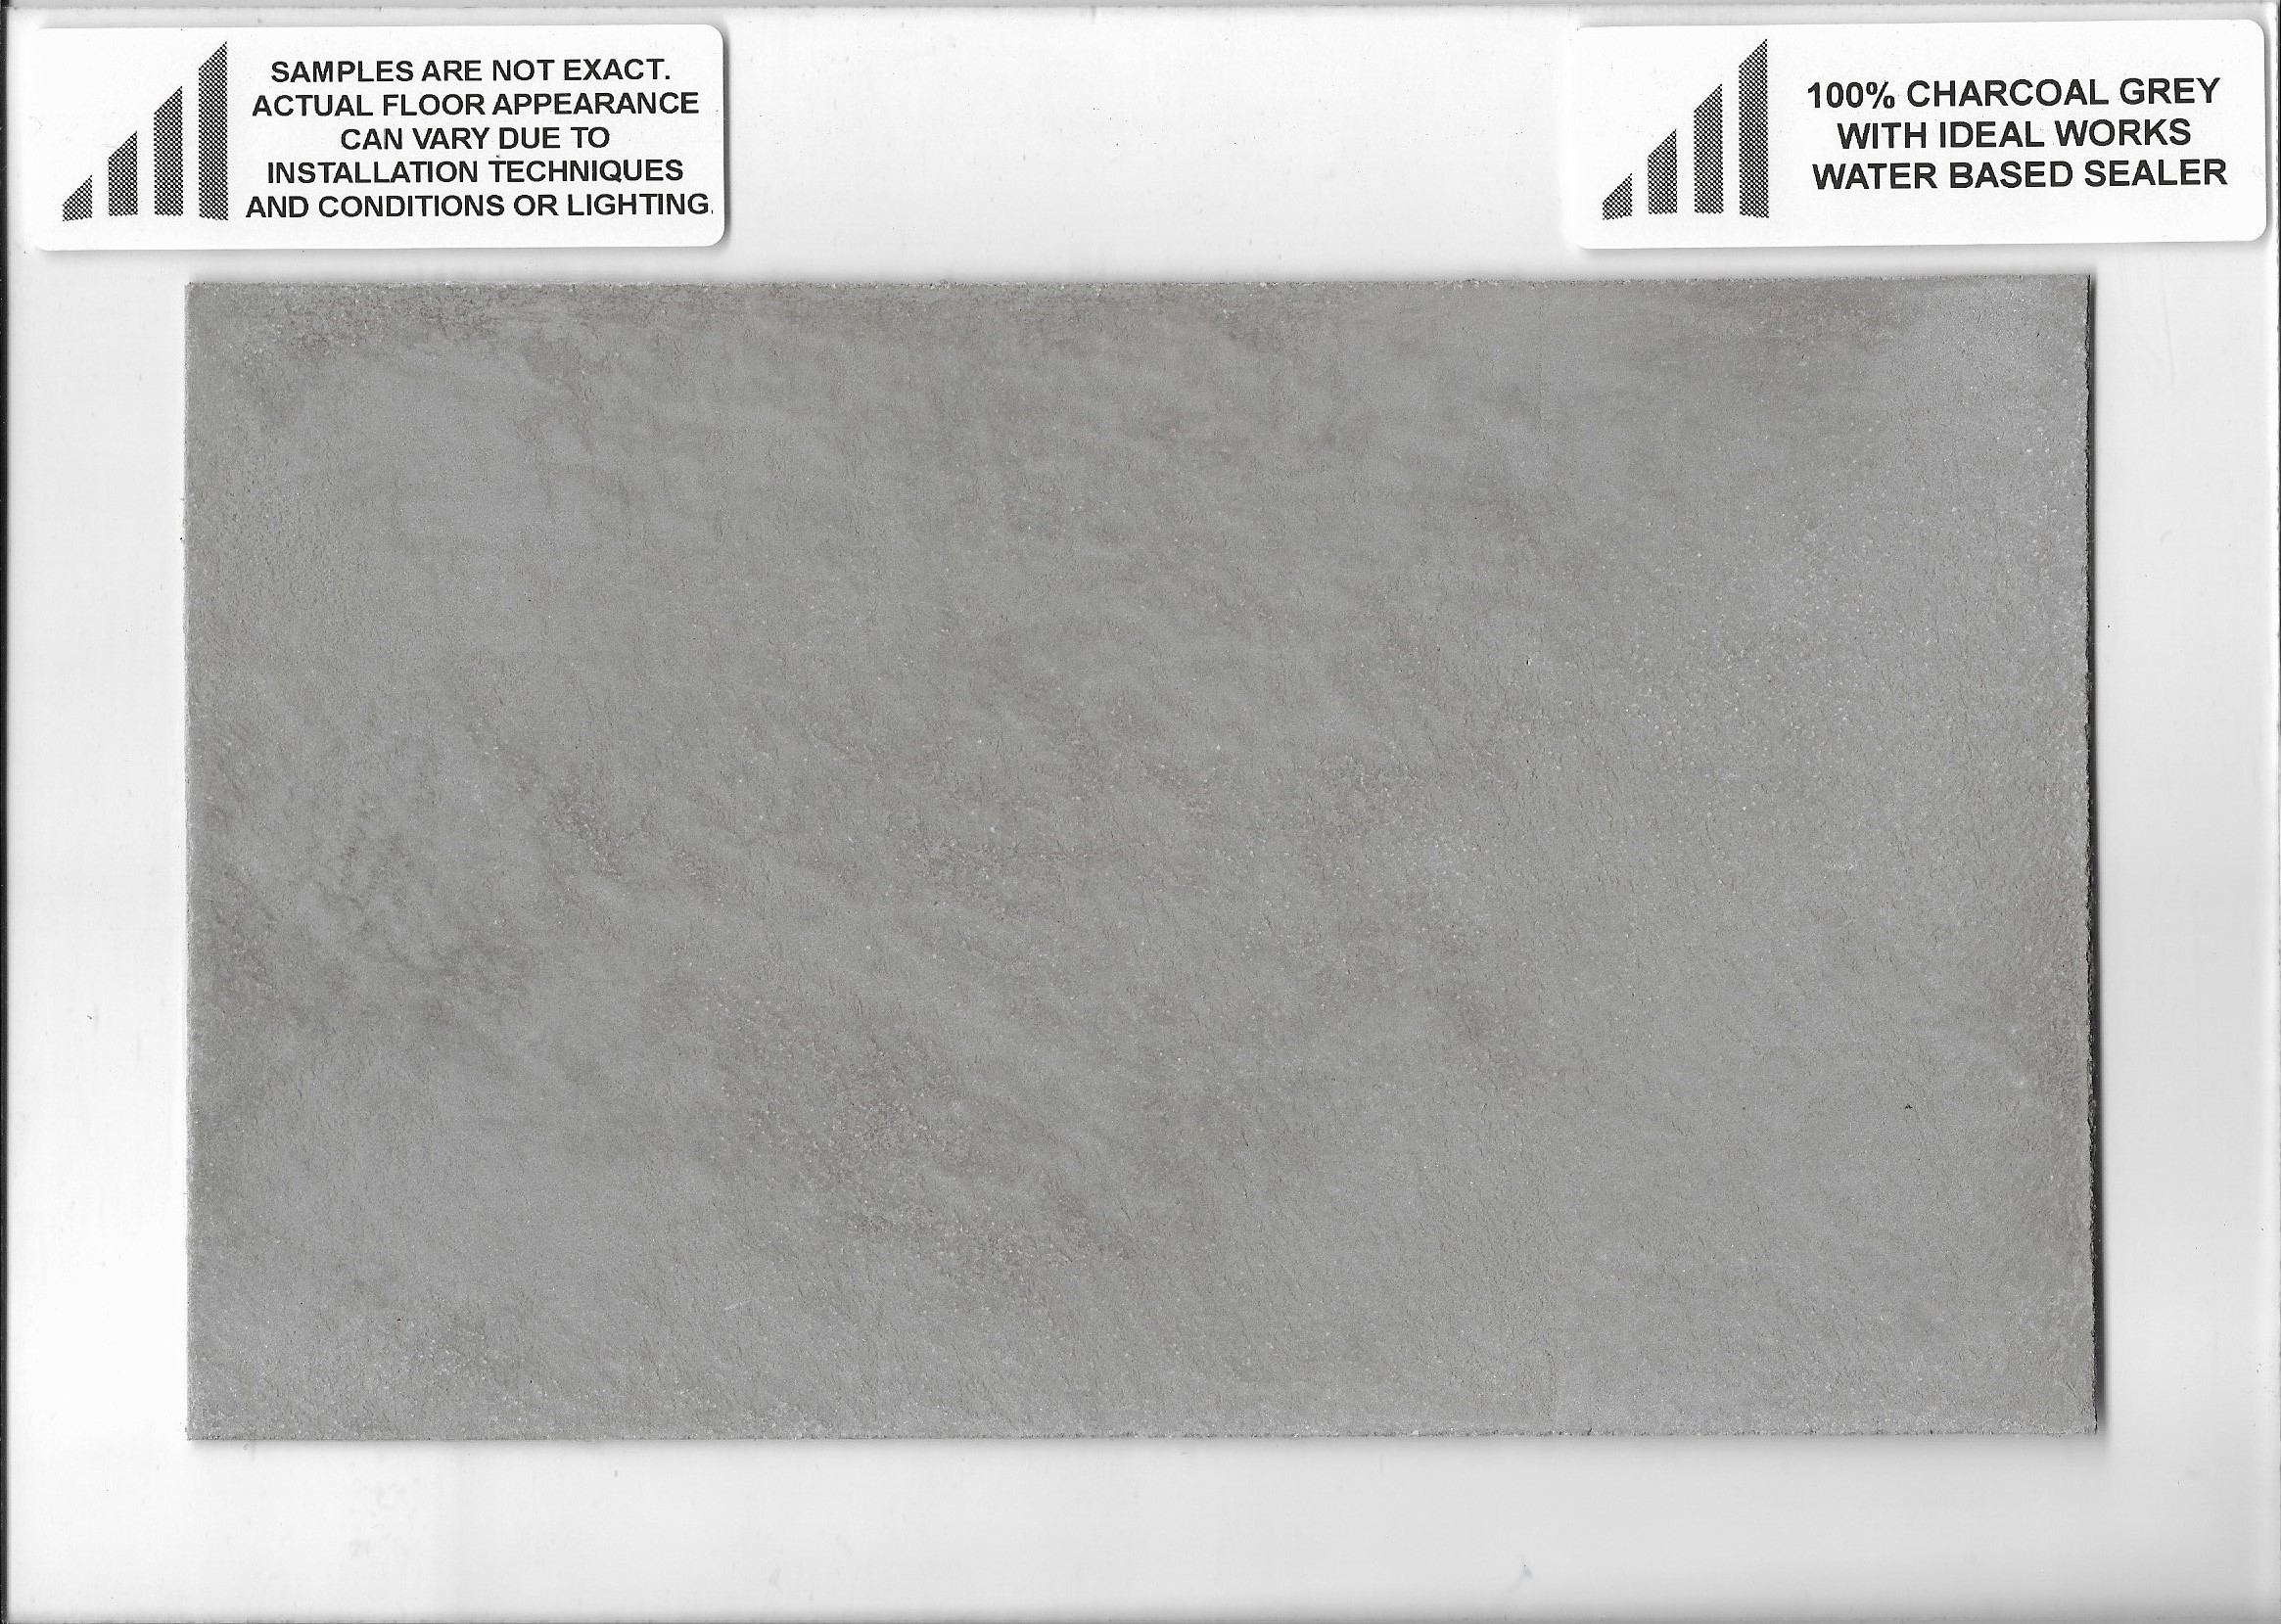 400-100 Percent Charcoal Grey with WB Sealer.jpg